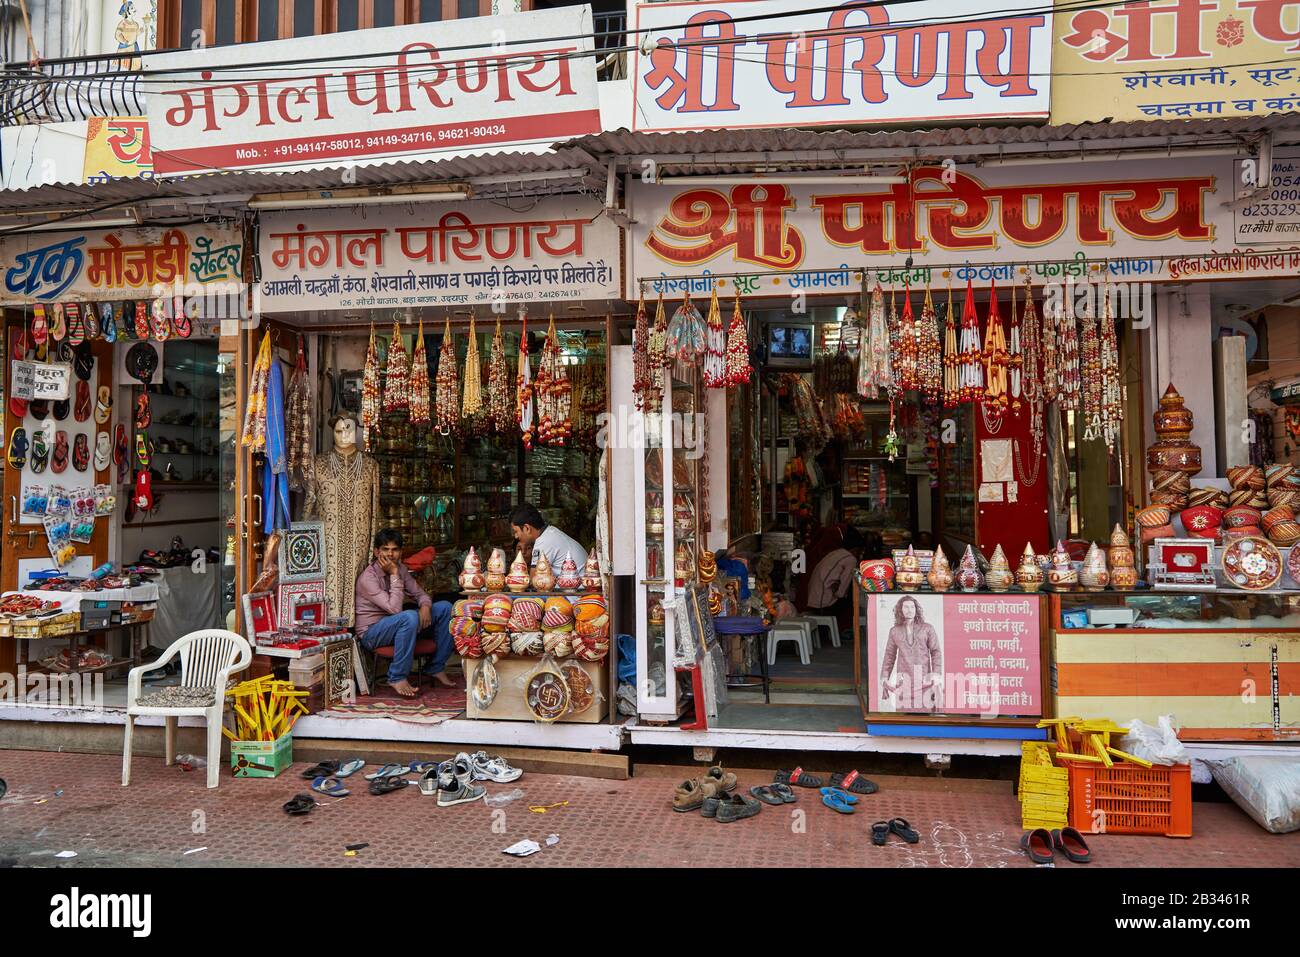 shop with weeding items in Udaipur, Rajasthan, India Stock Photo